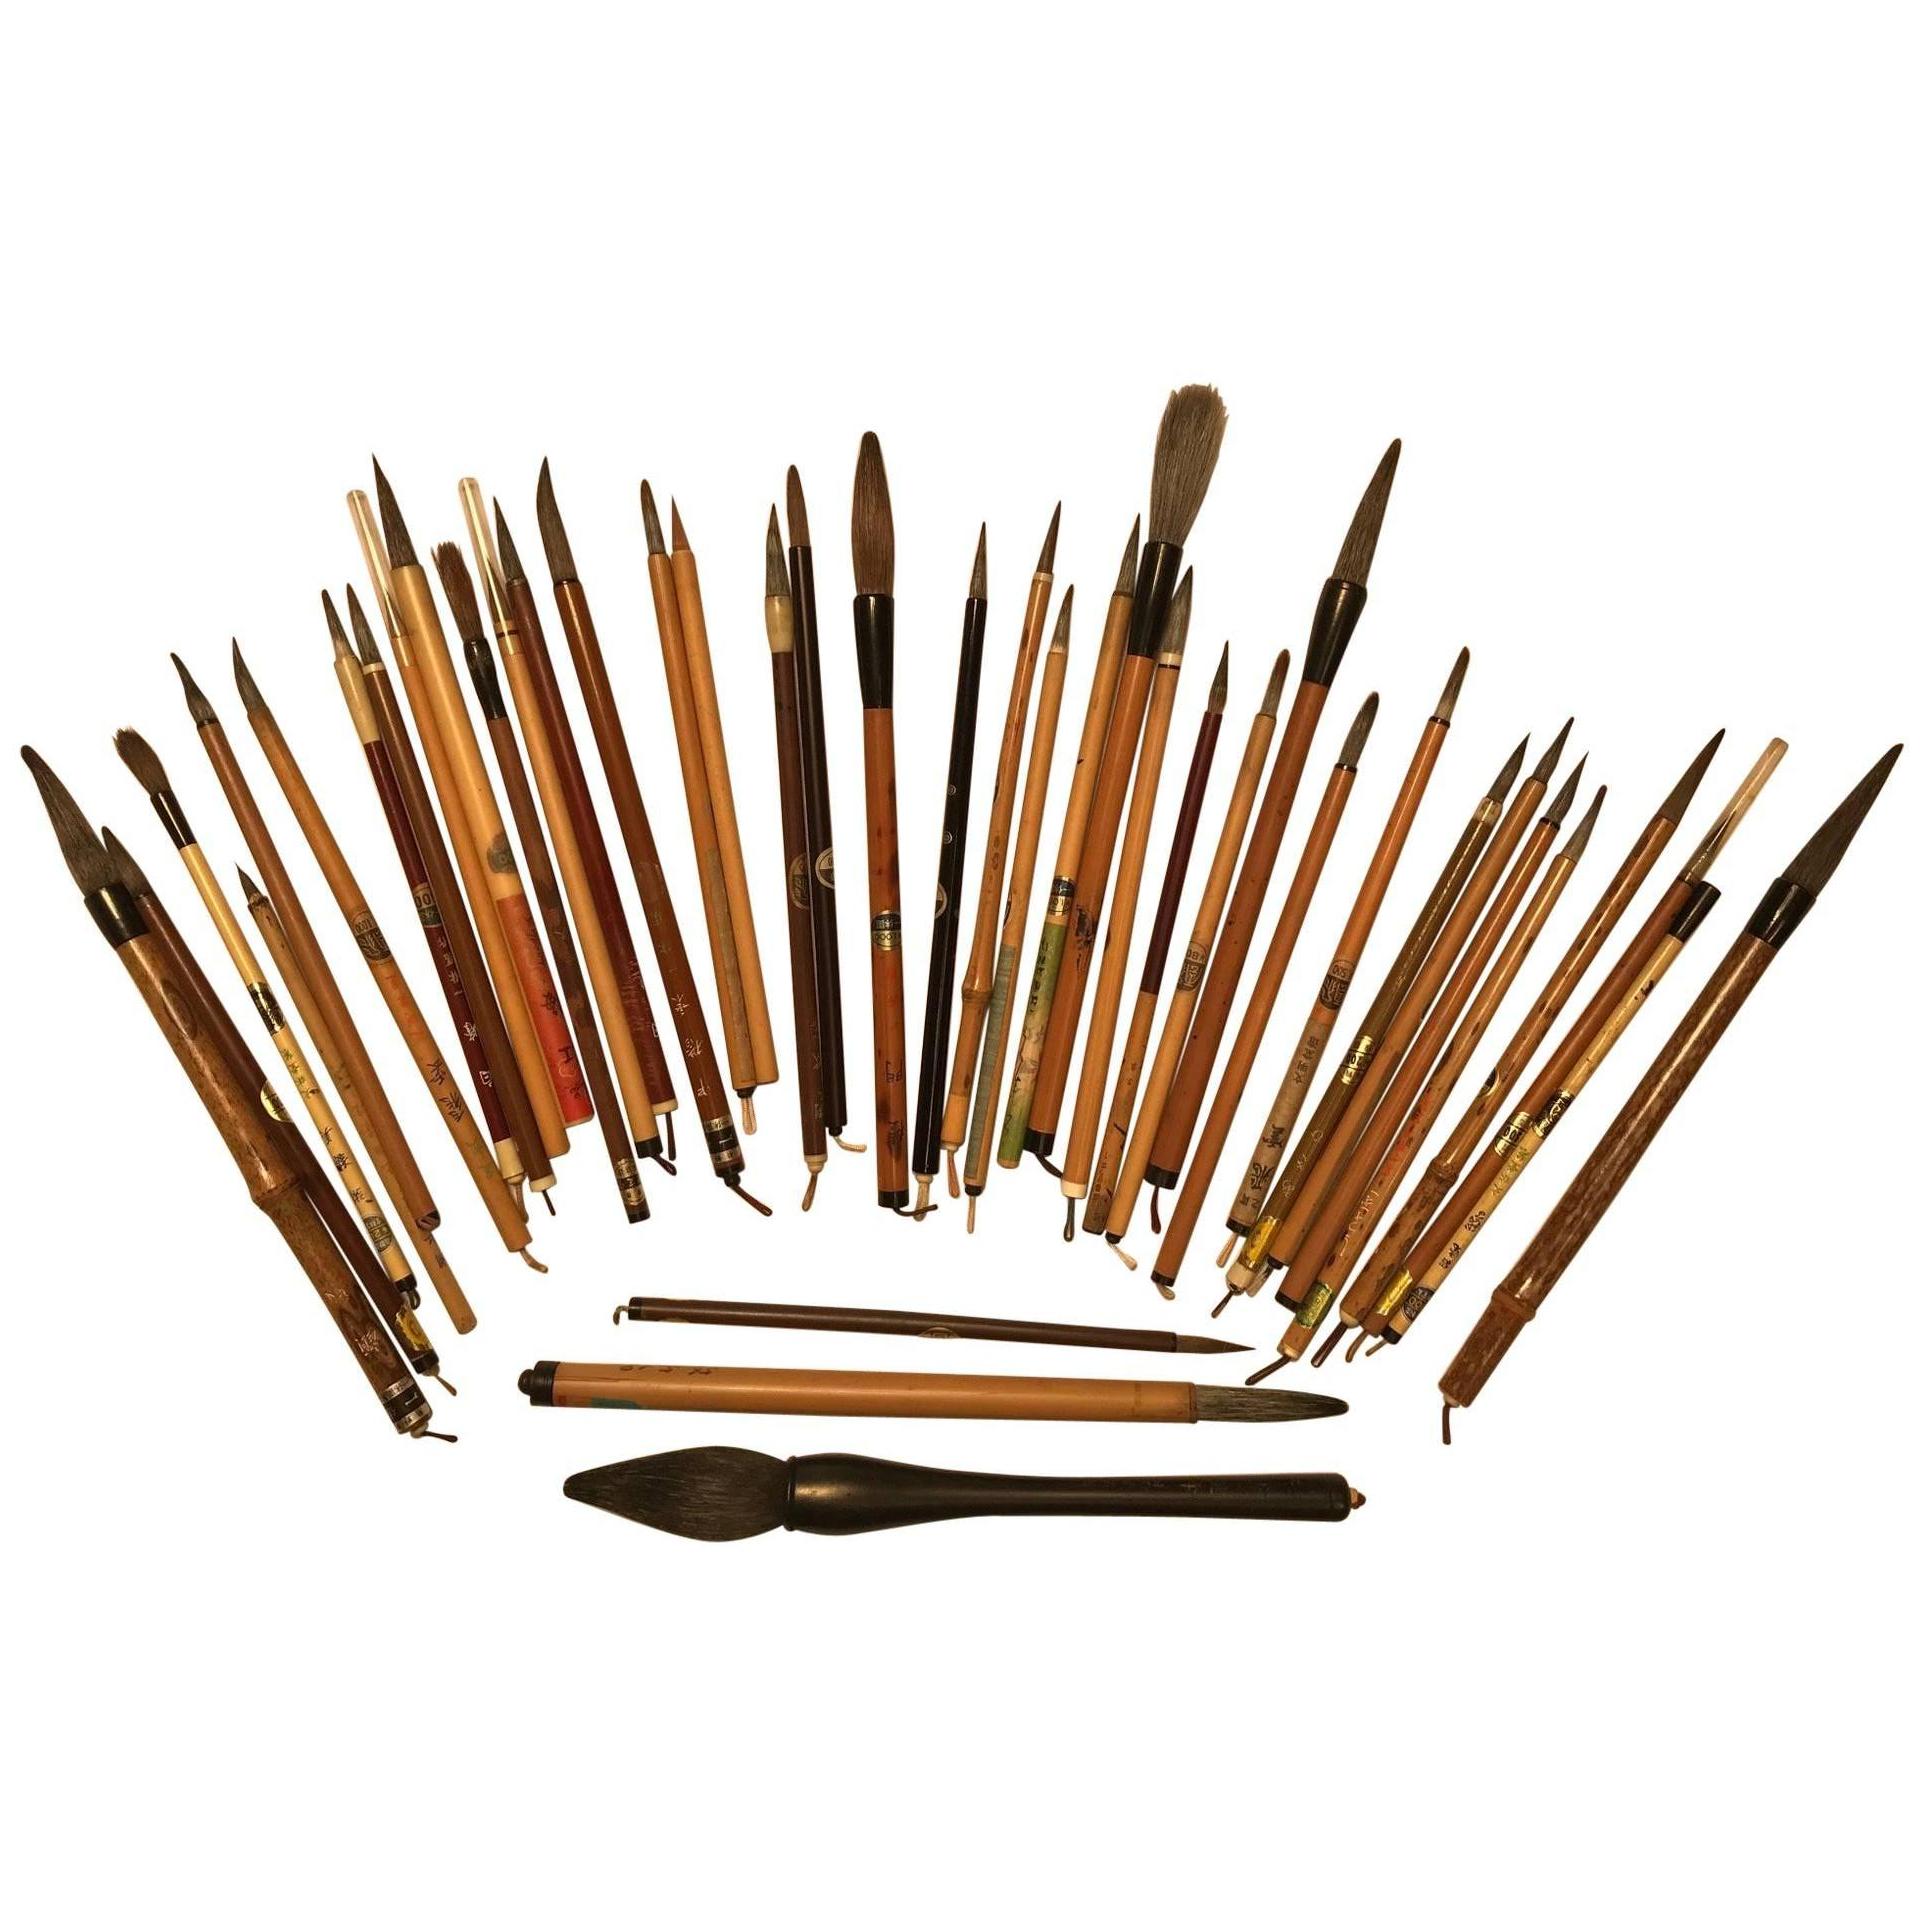 Artisan's Cache of 40 Old Chinese Paint Calligraphy Bamboo Brushes